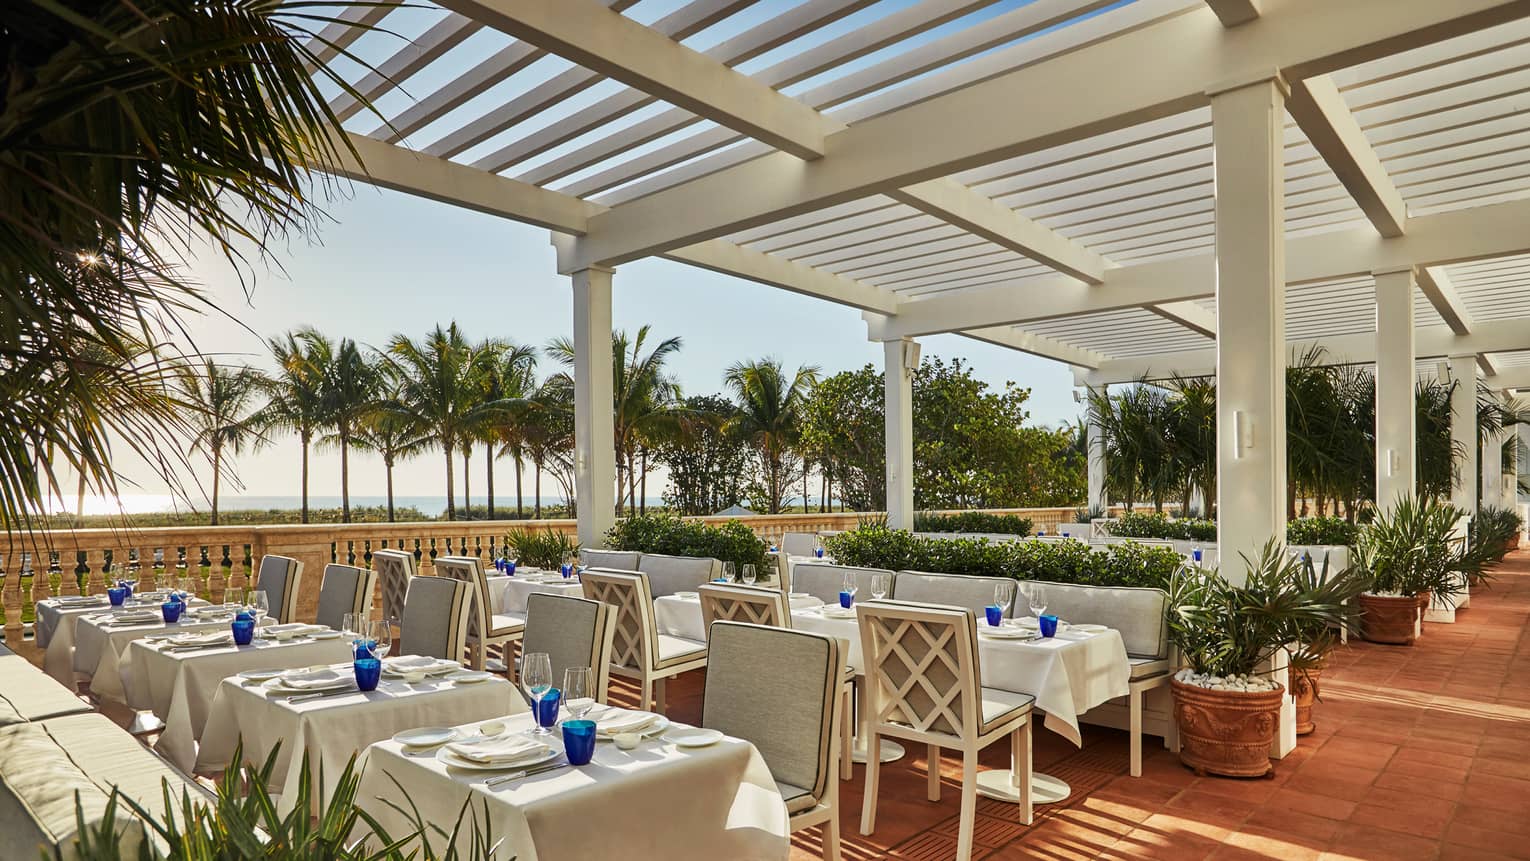 Large restaurant patio with formal dining tables under white pergola. Palm trees and beach in background